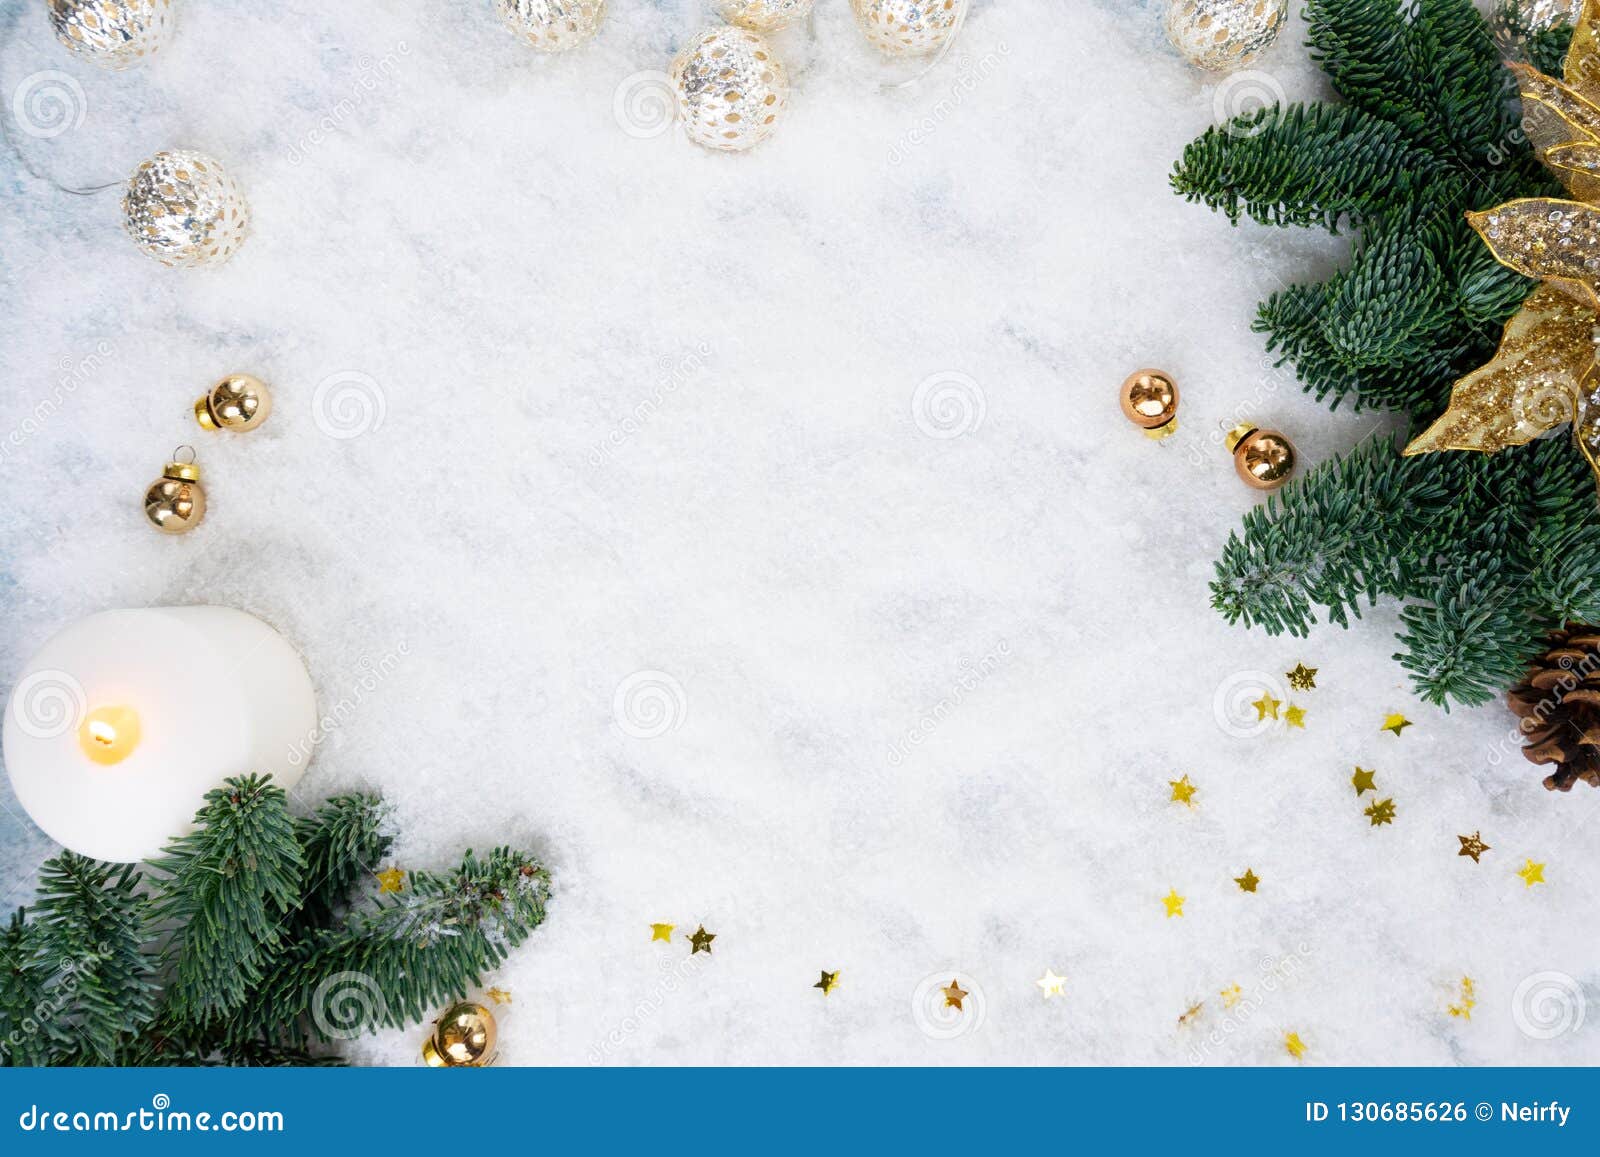 Christmas scene with snow stock photo. Image of frame - 130685626